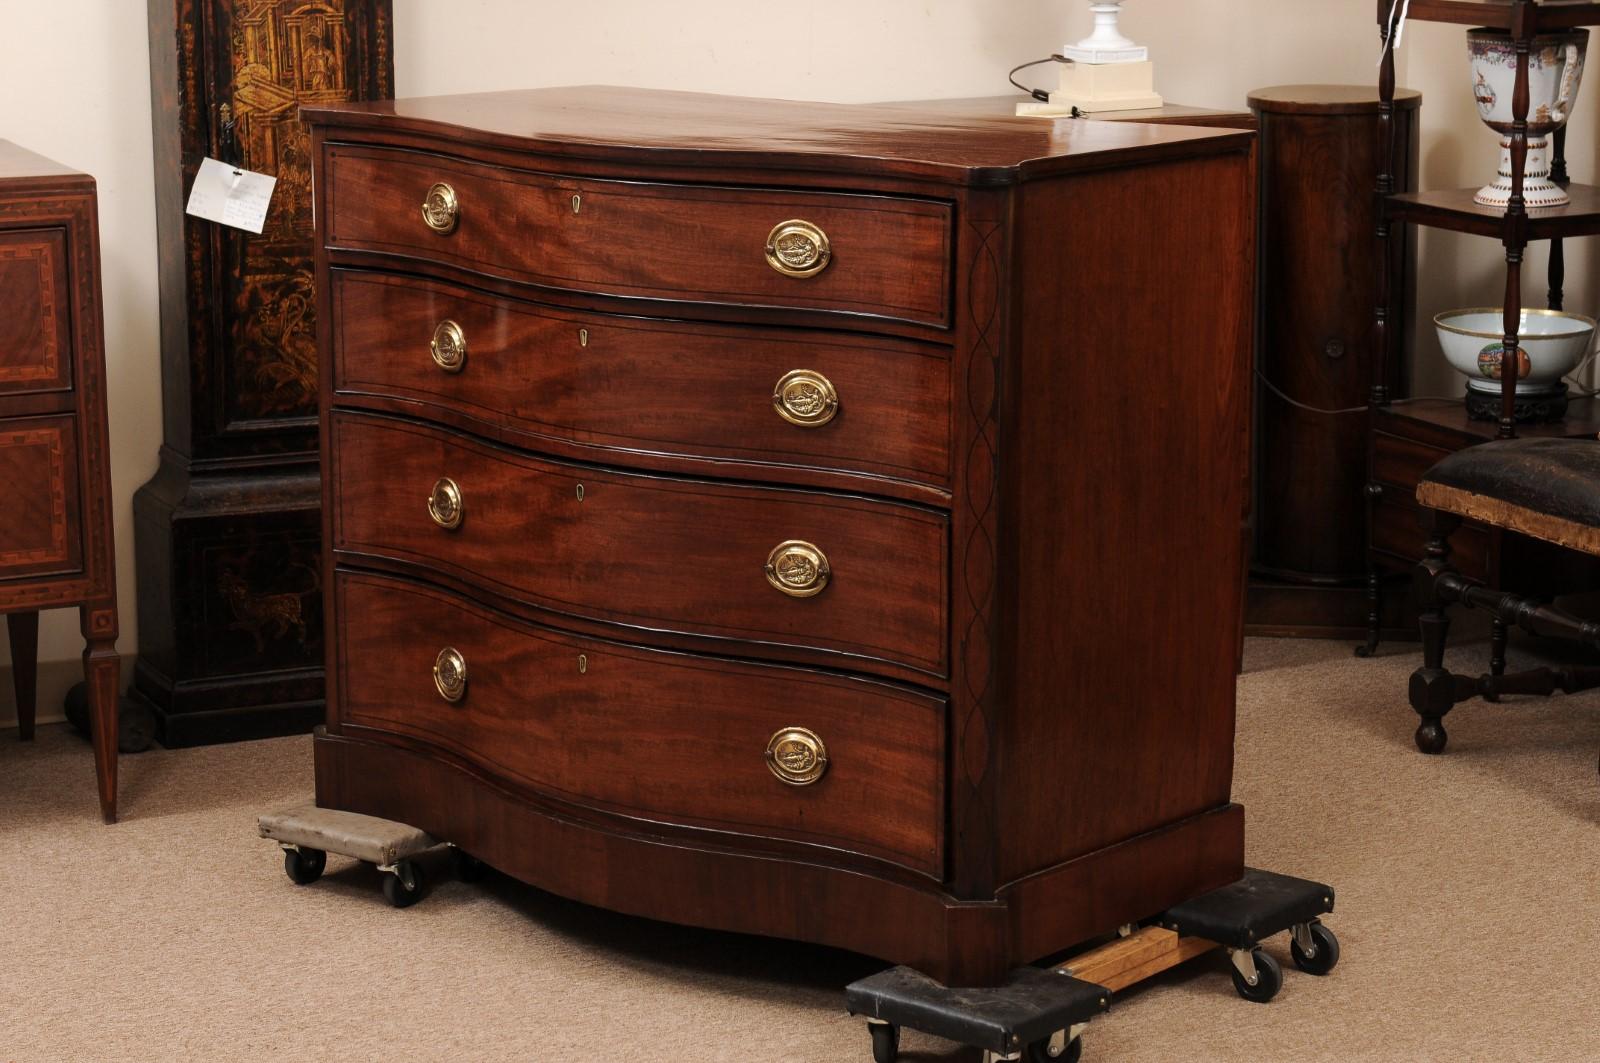 Large 19th Century English Mahogany Serpentine Chest with Ebonized String Inlay For Sale 9